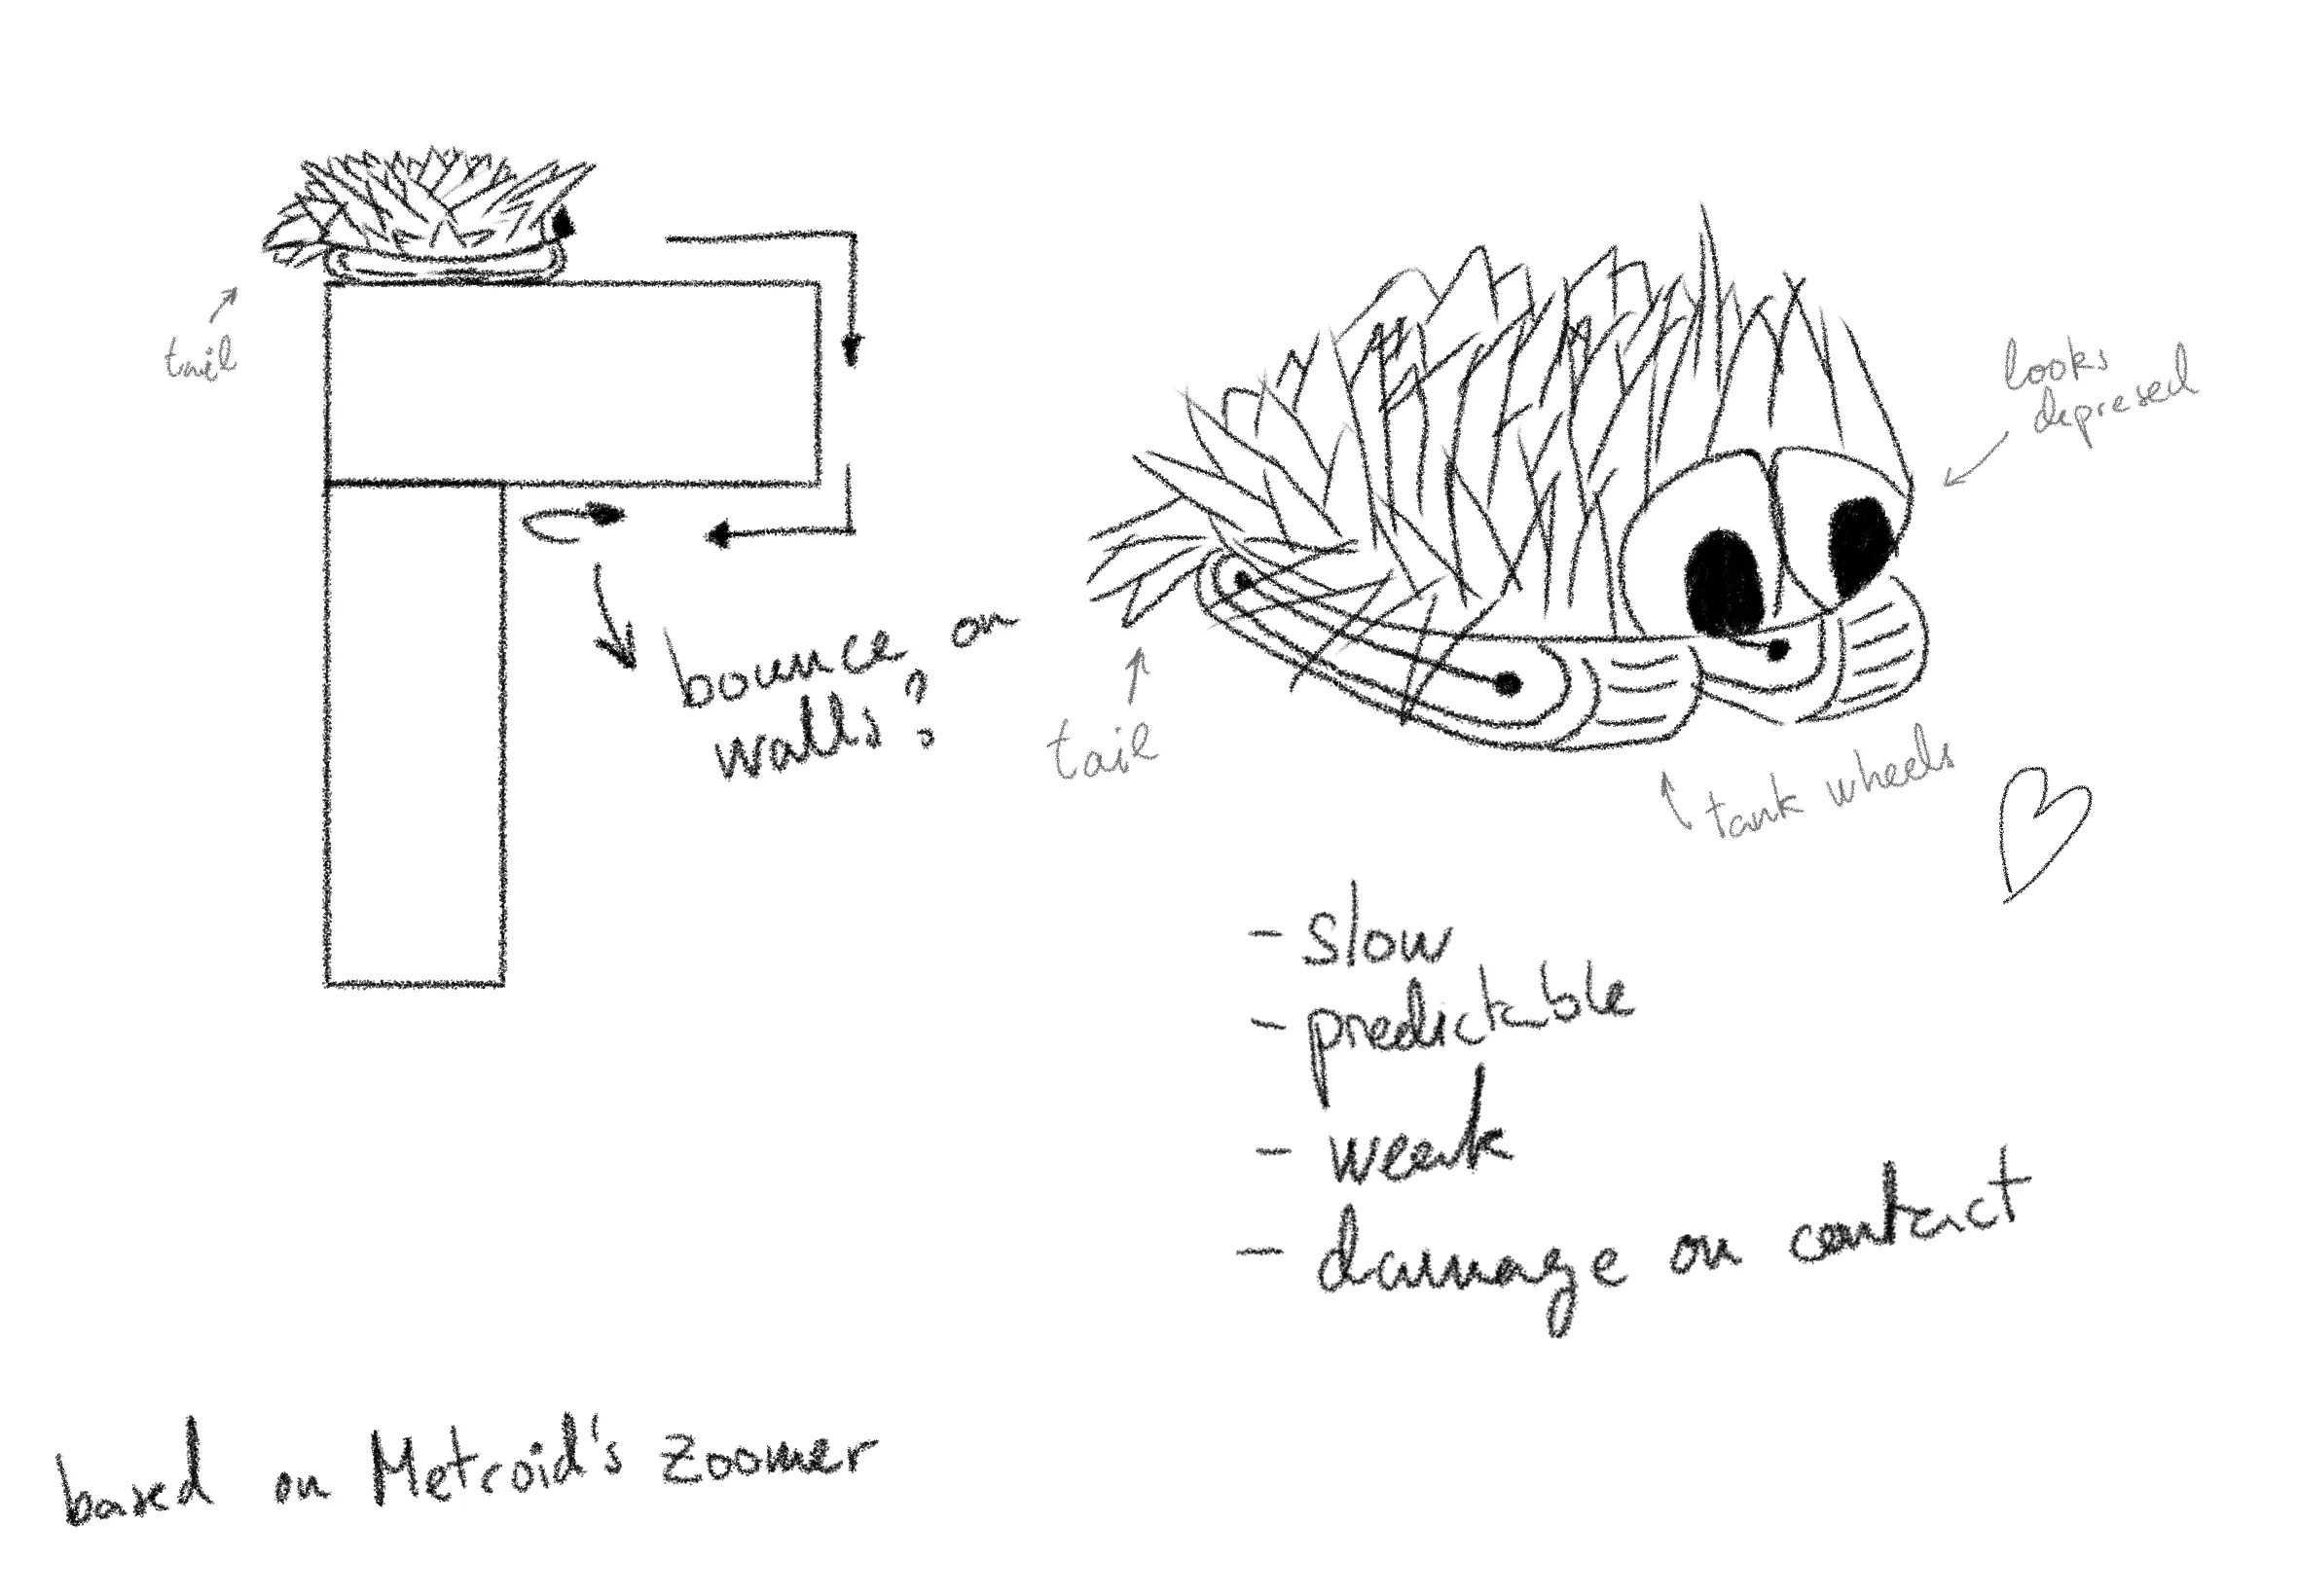 Concept art of a spiky enemy